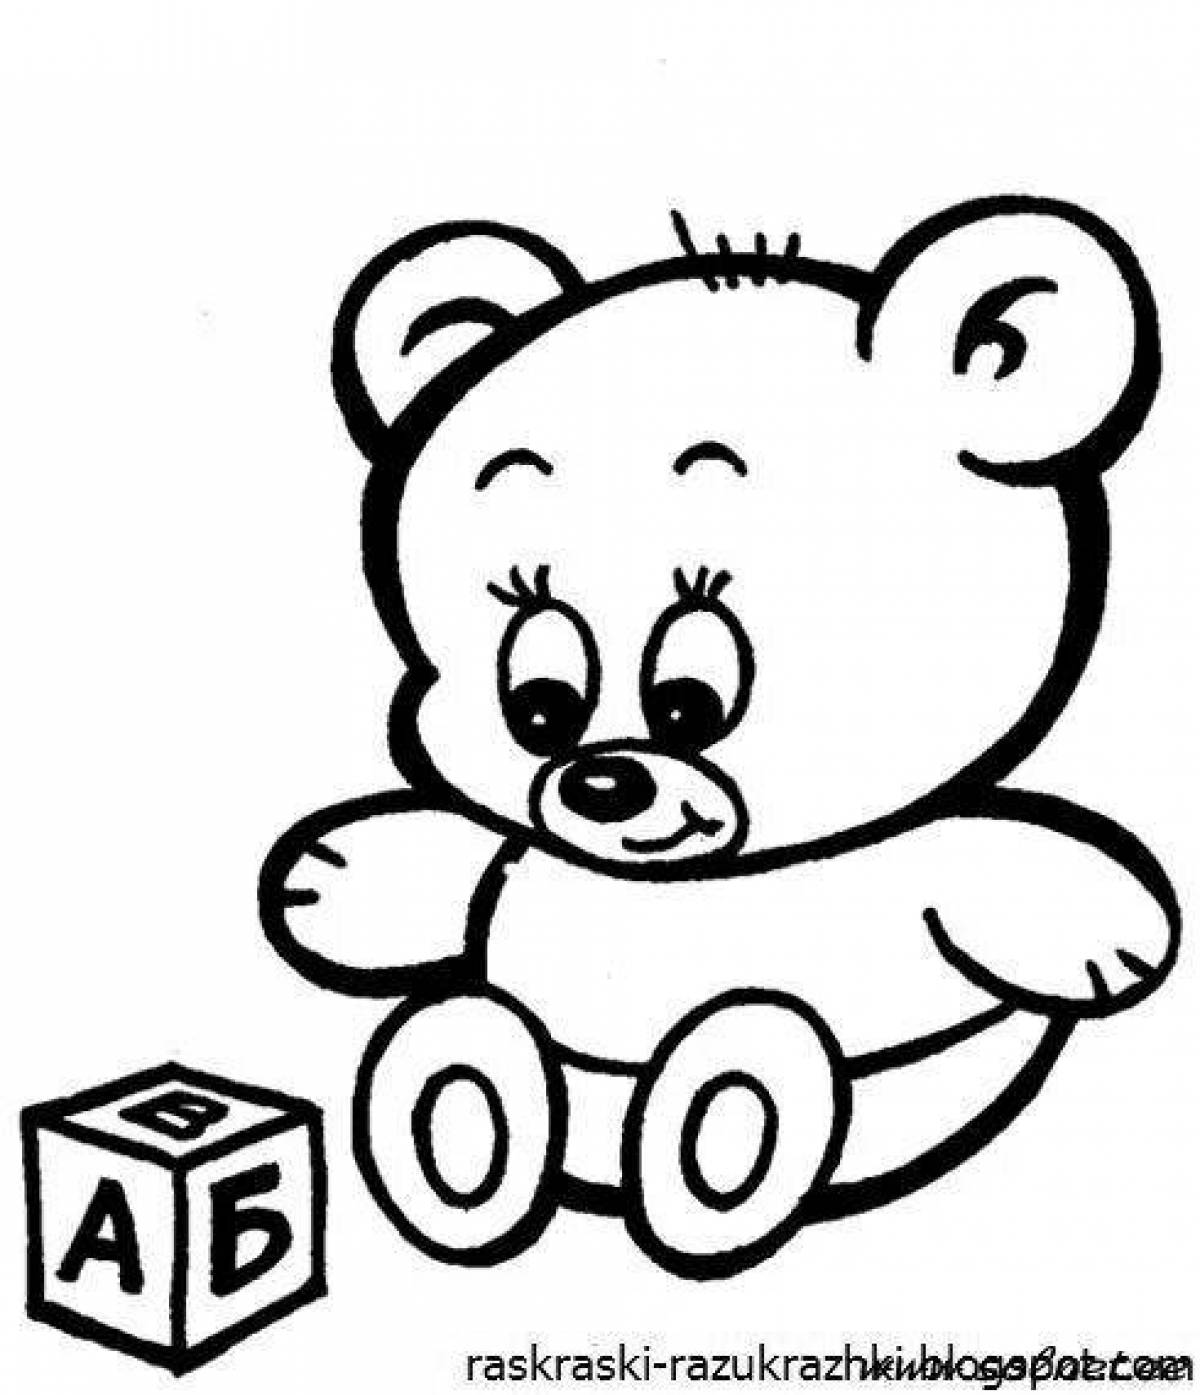 Crazy teddy bear coloring book for 3-4 year olds